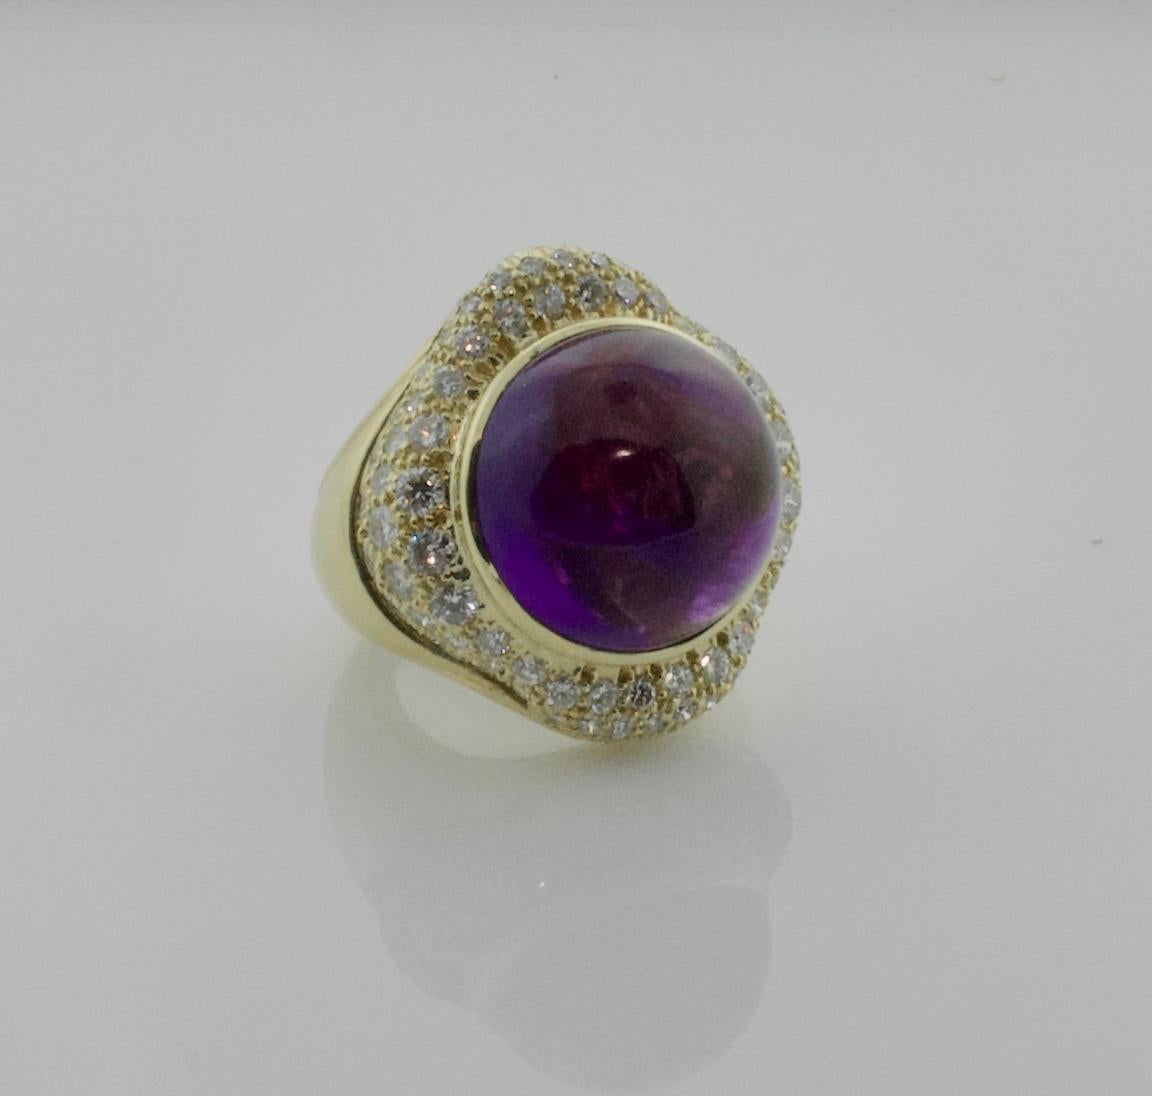 Fashionable Amethyst 37 carats and Diamond Ring in 18k with 2.60 in Diamonds
One Cabochon Cut Amethyst  weighing 37.00 carats approximately [bright with no imperfections visible to the naked eye]
Eighty Two Round Brilliant Cut Diamonds weighing 2.60